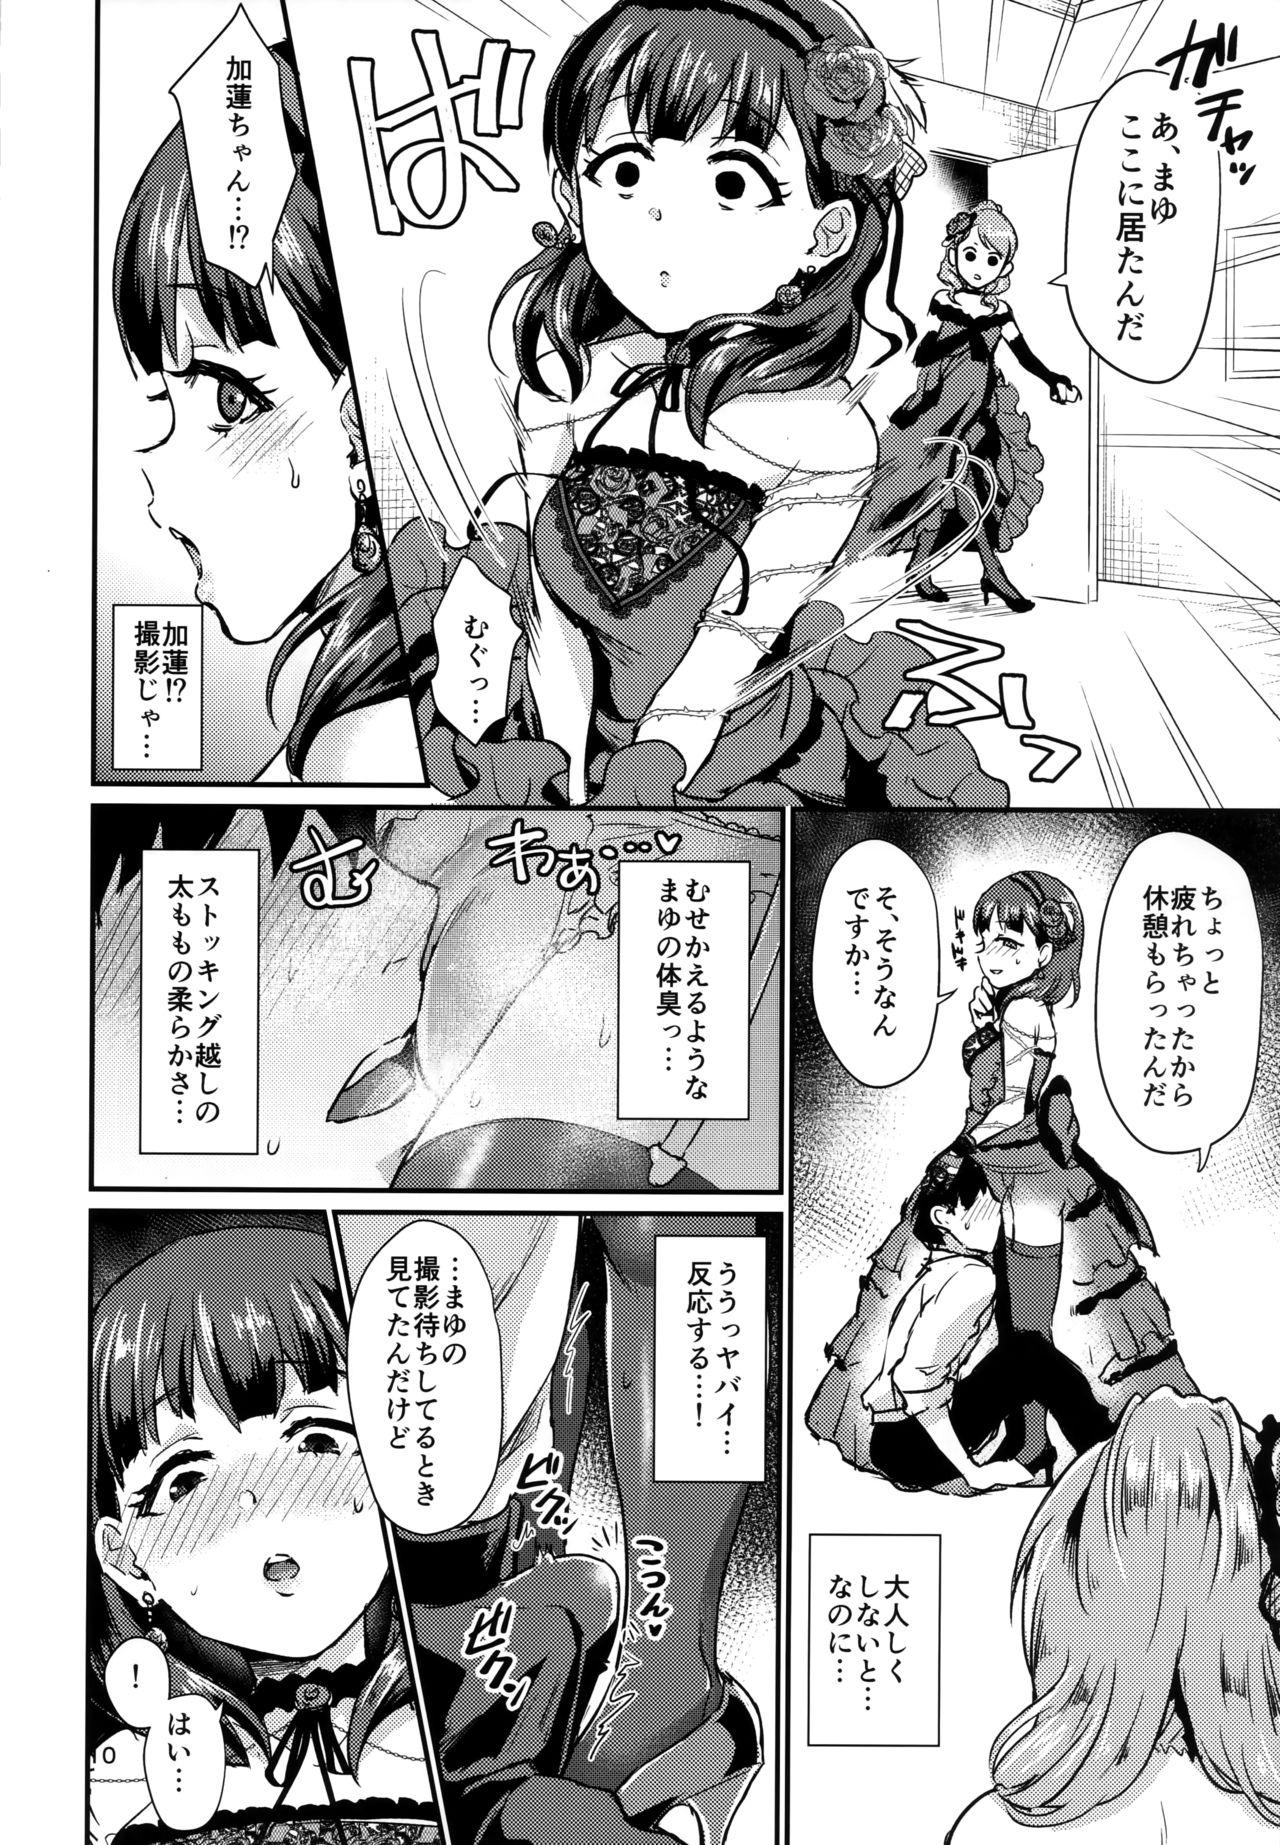 Roughsex Don't stop my pure love - The idolmaster Gordinha - Page 9